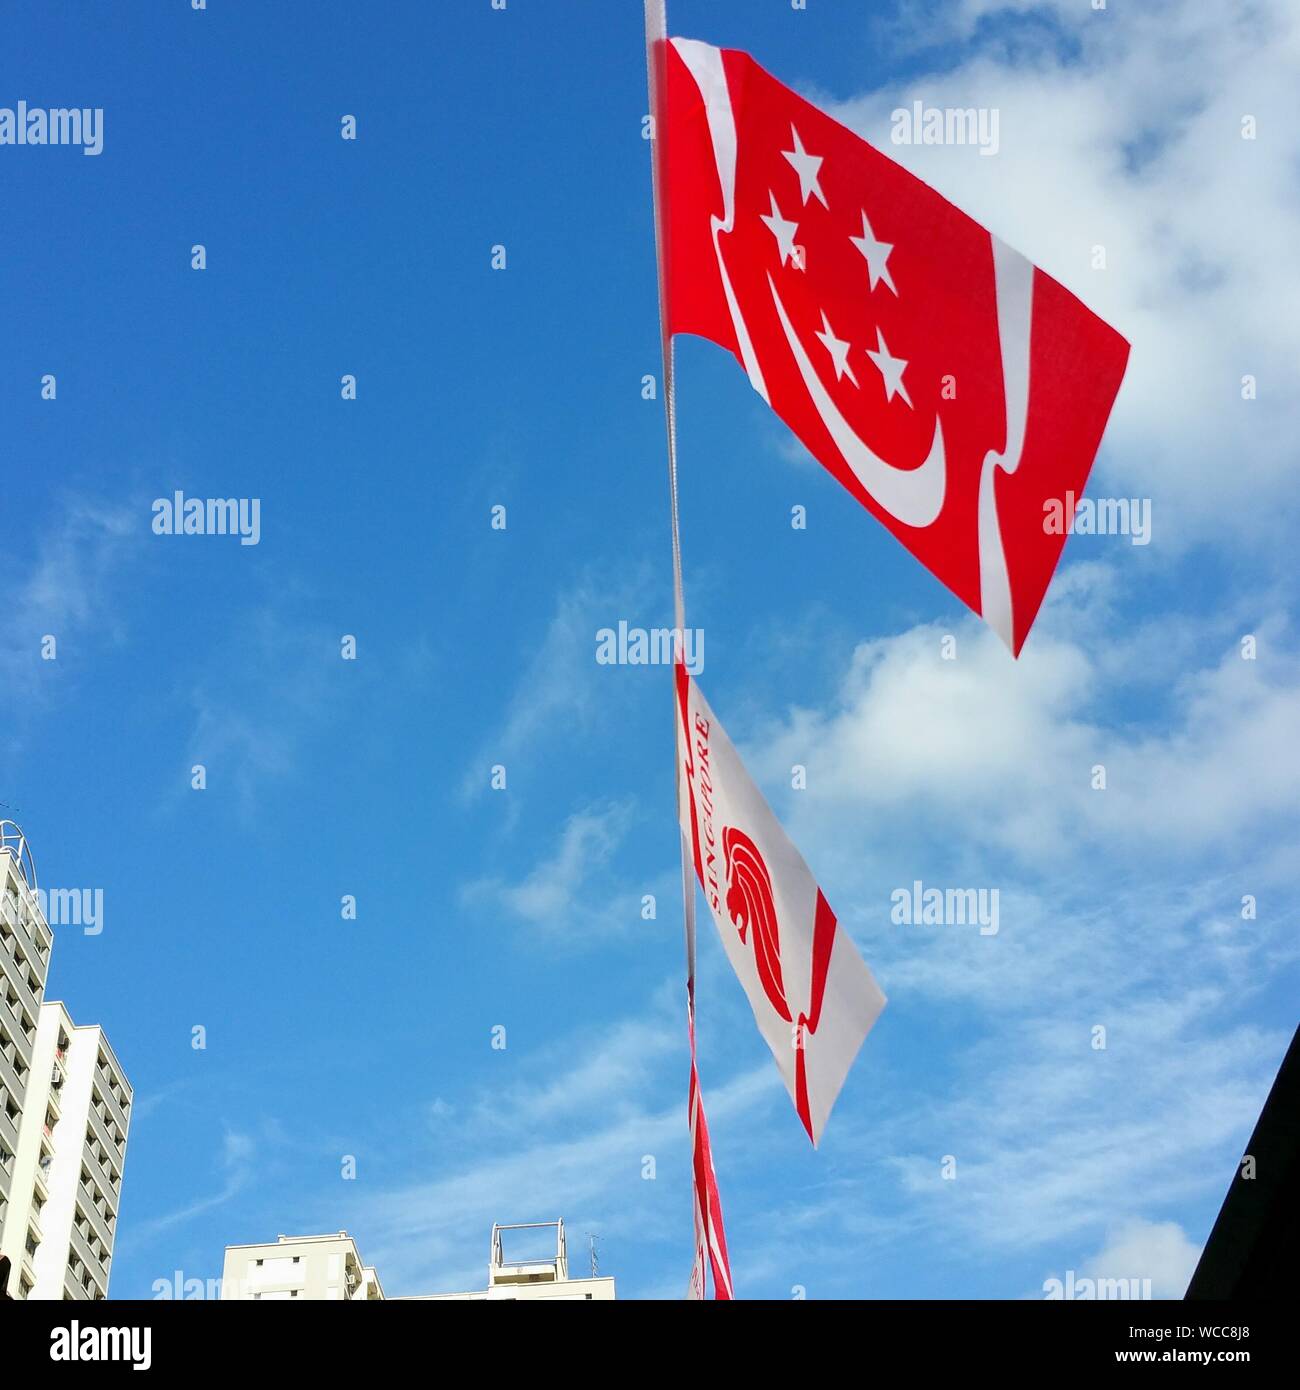 Low Angle View Of Singaporean Flag Against Sky Stock Photo